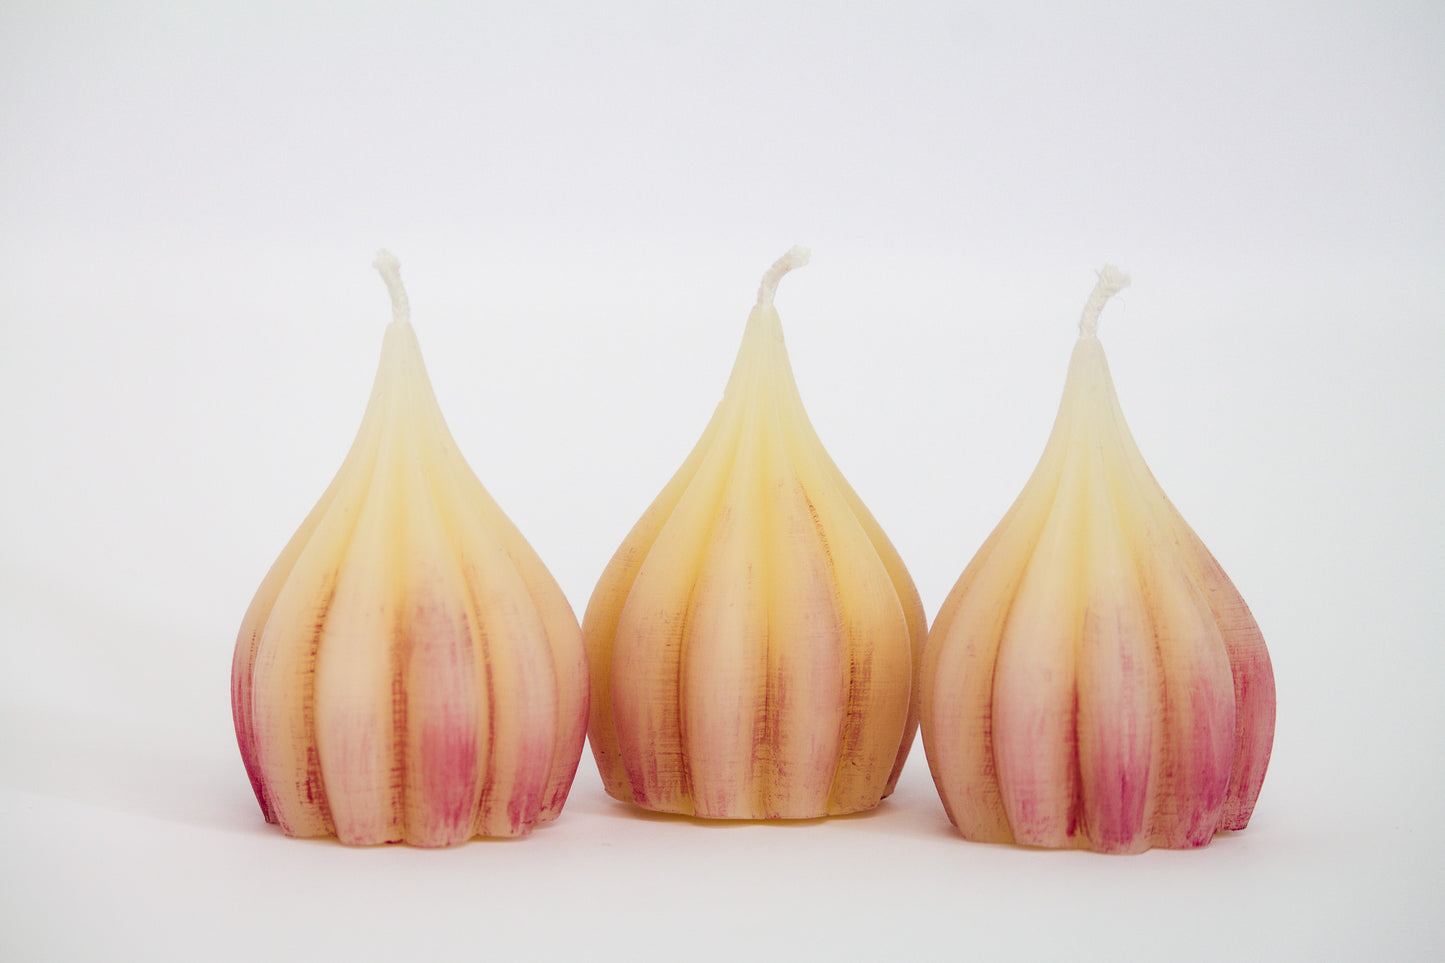 3 large garlic-shaped pure beeswax candles with some purple tint to resemble real garlic